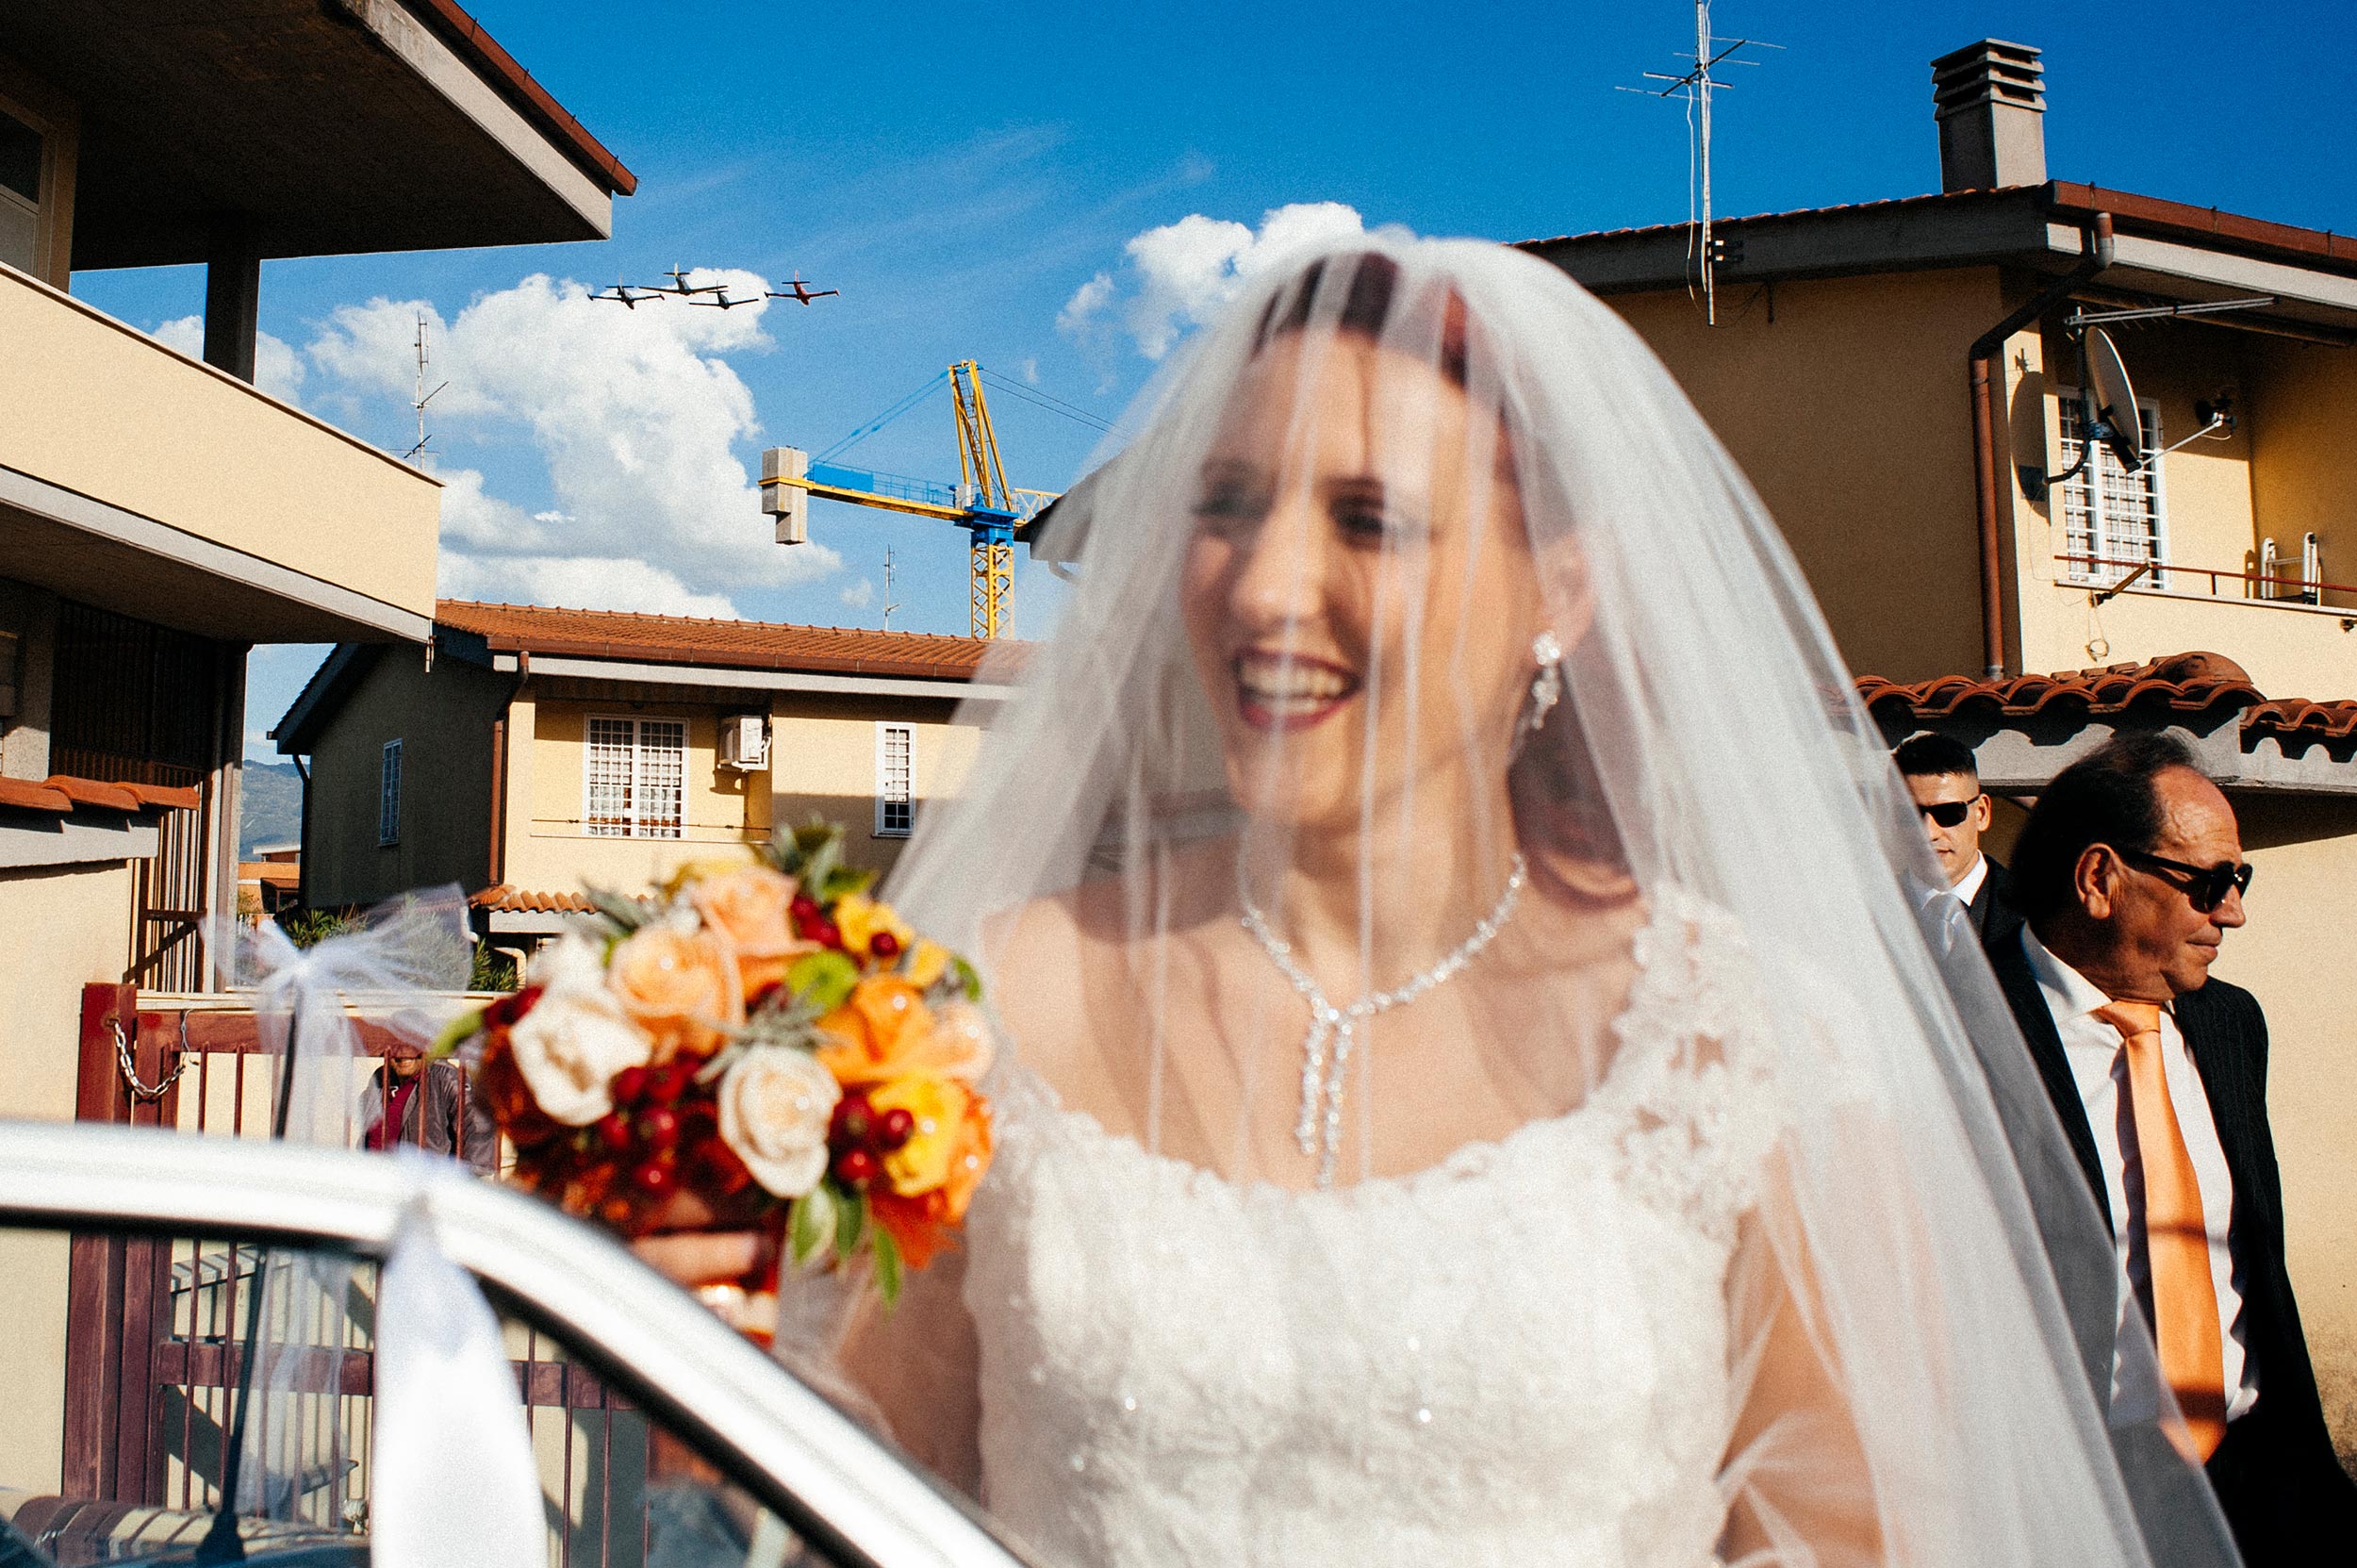 bride-going-to-ceremony-while-aircrafts-pass-over-her-head.jpg